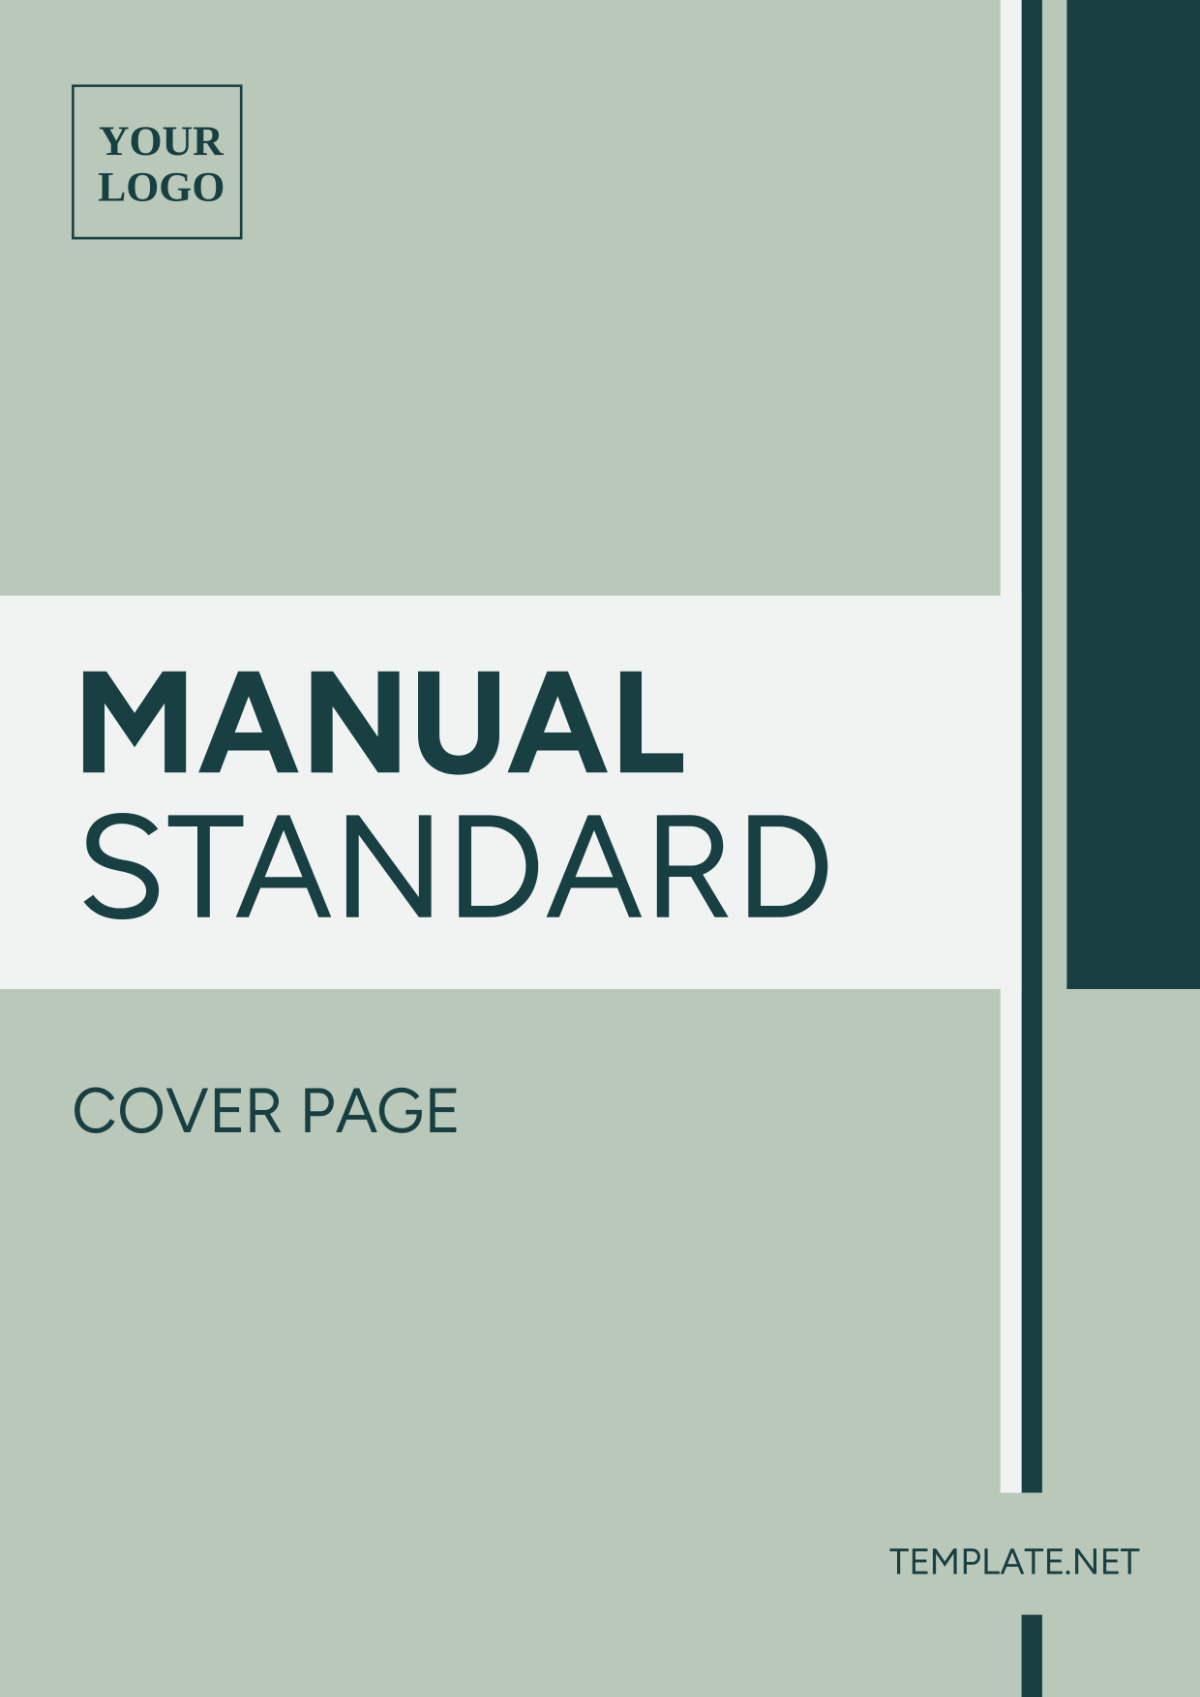 Manual Standard Cover Page Template